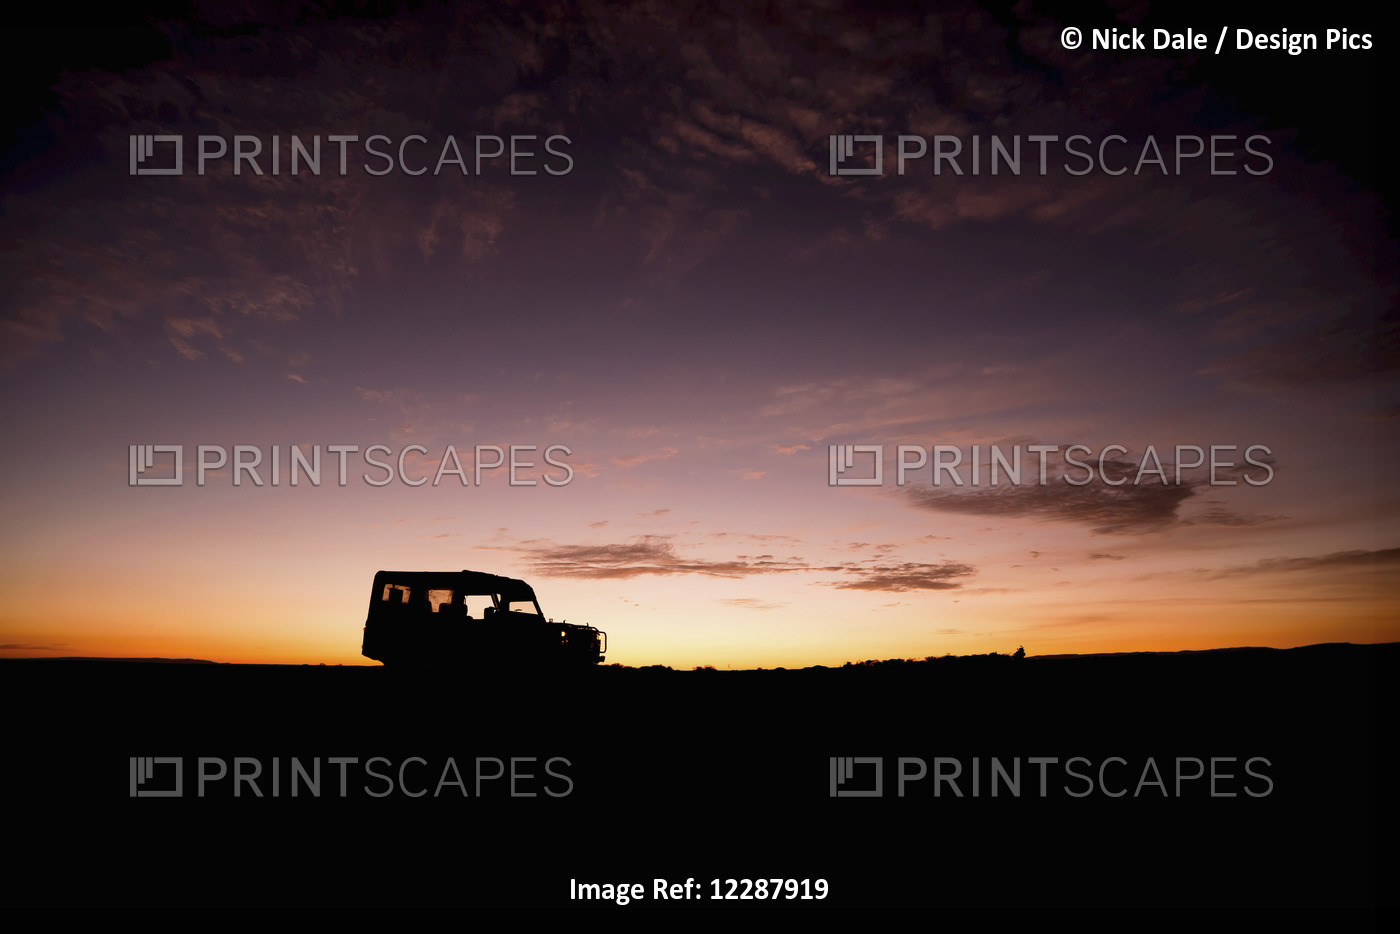 A Truck Parked On The Savannah With It's Headlights On Is Shown In Silhouette ...